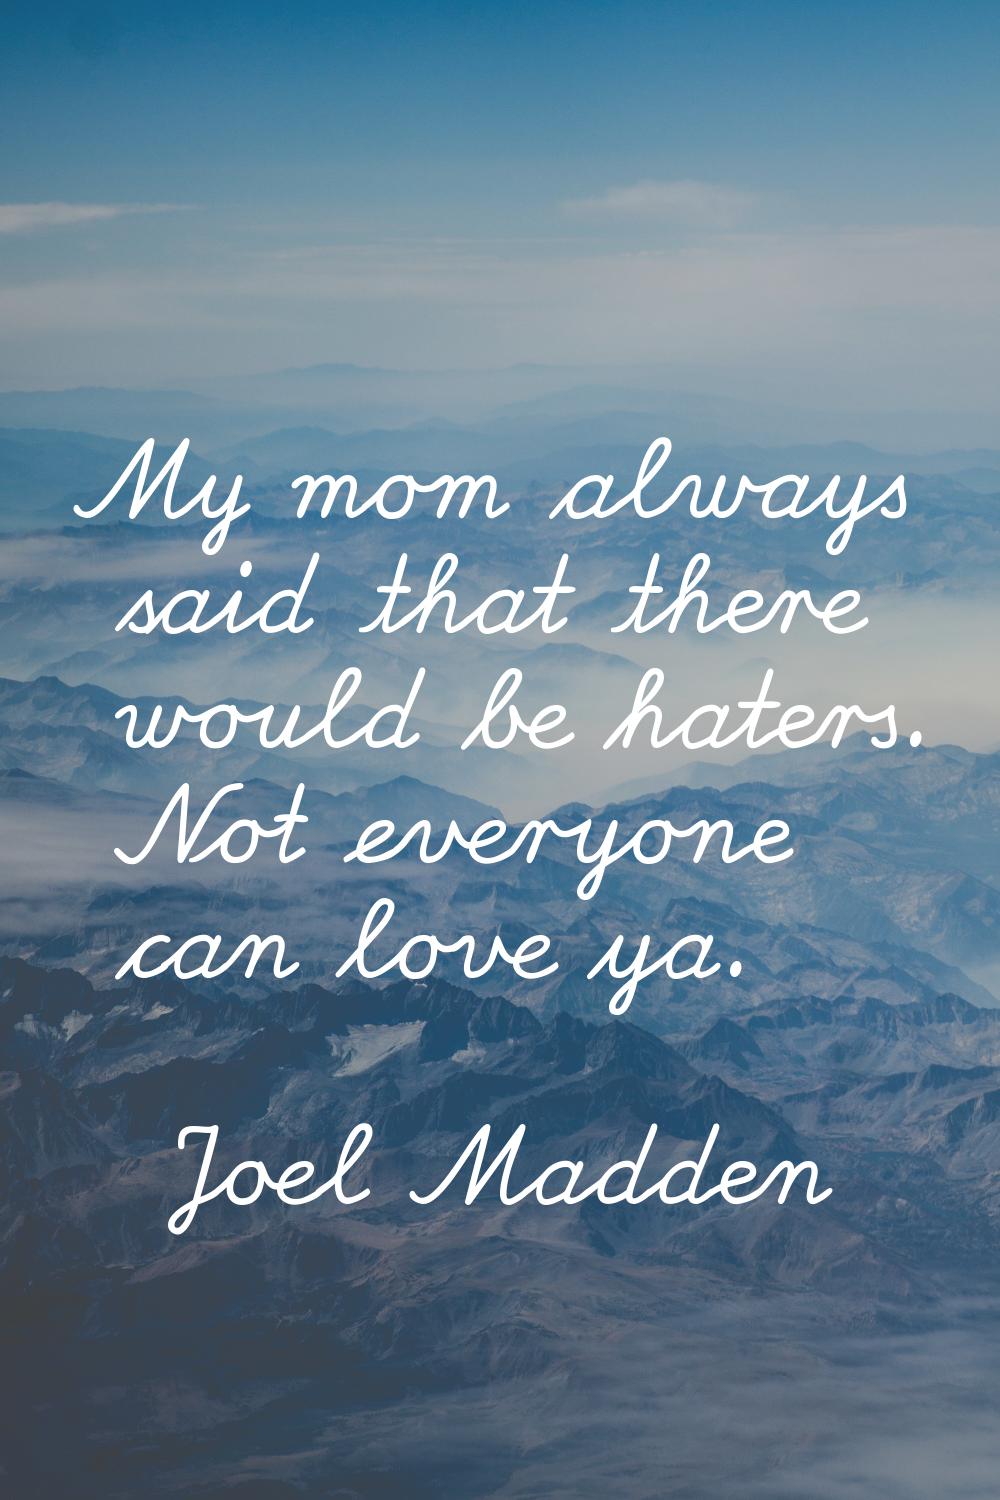 My mom always said that there would be haters. Not everyone can love ya.